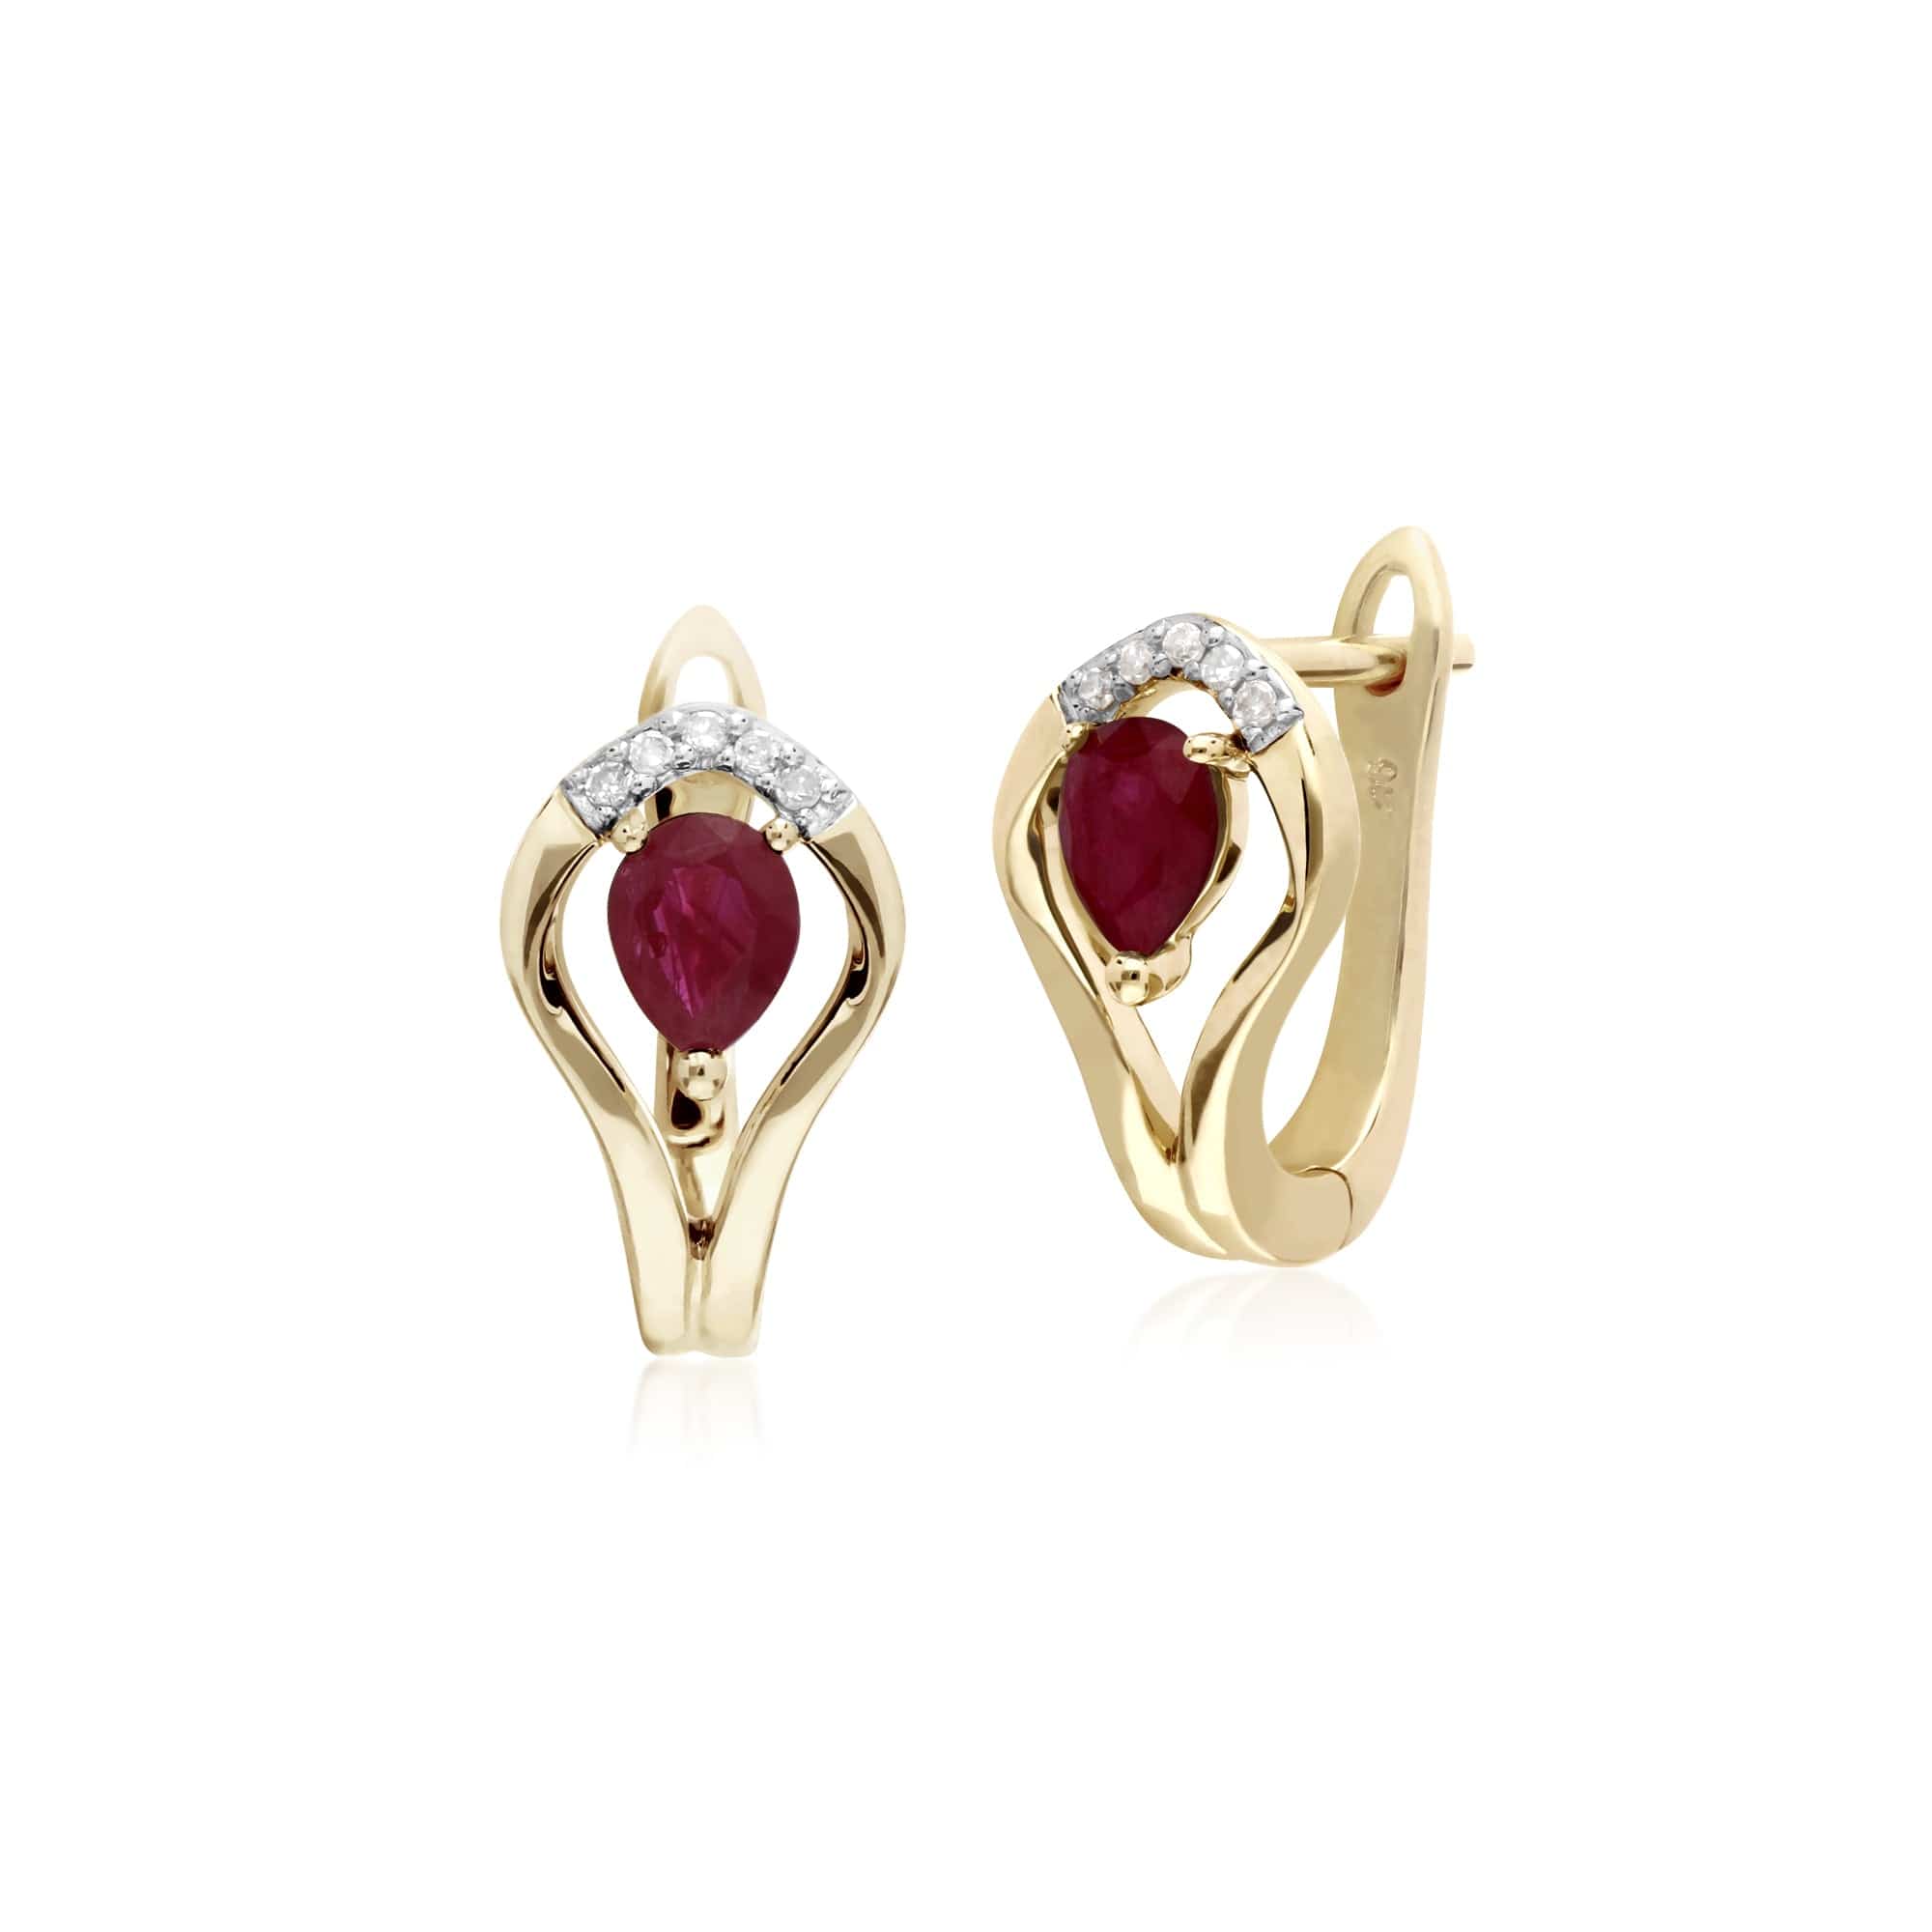 135E1578019-135P1916019 Classic Oval Ruby & Diamond Leaf Lever back Earrings & Pendant Set in 9ct Yellow Gold 2